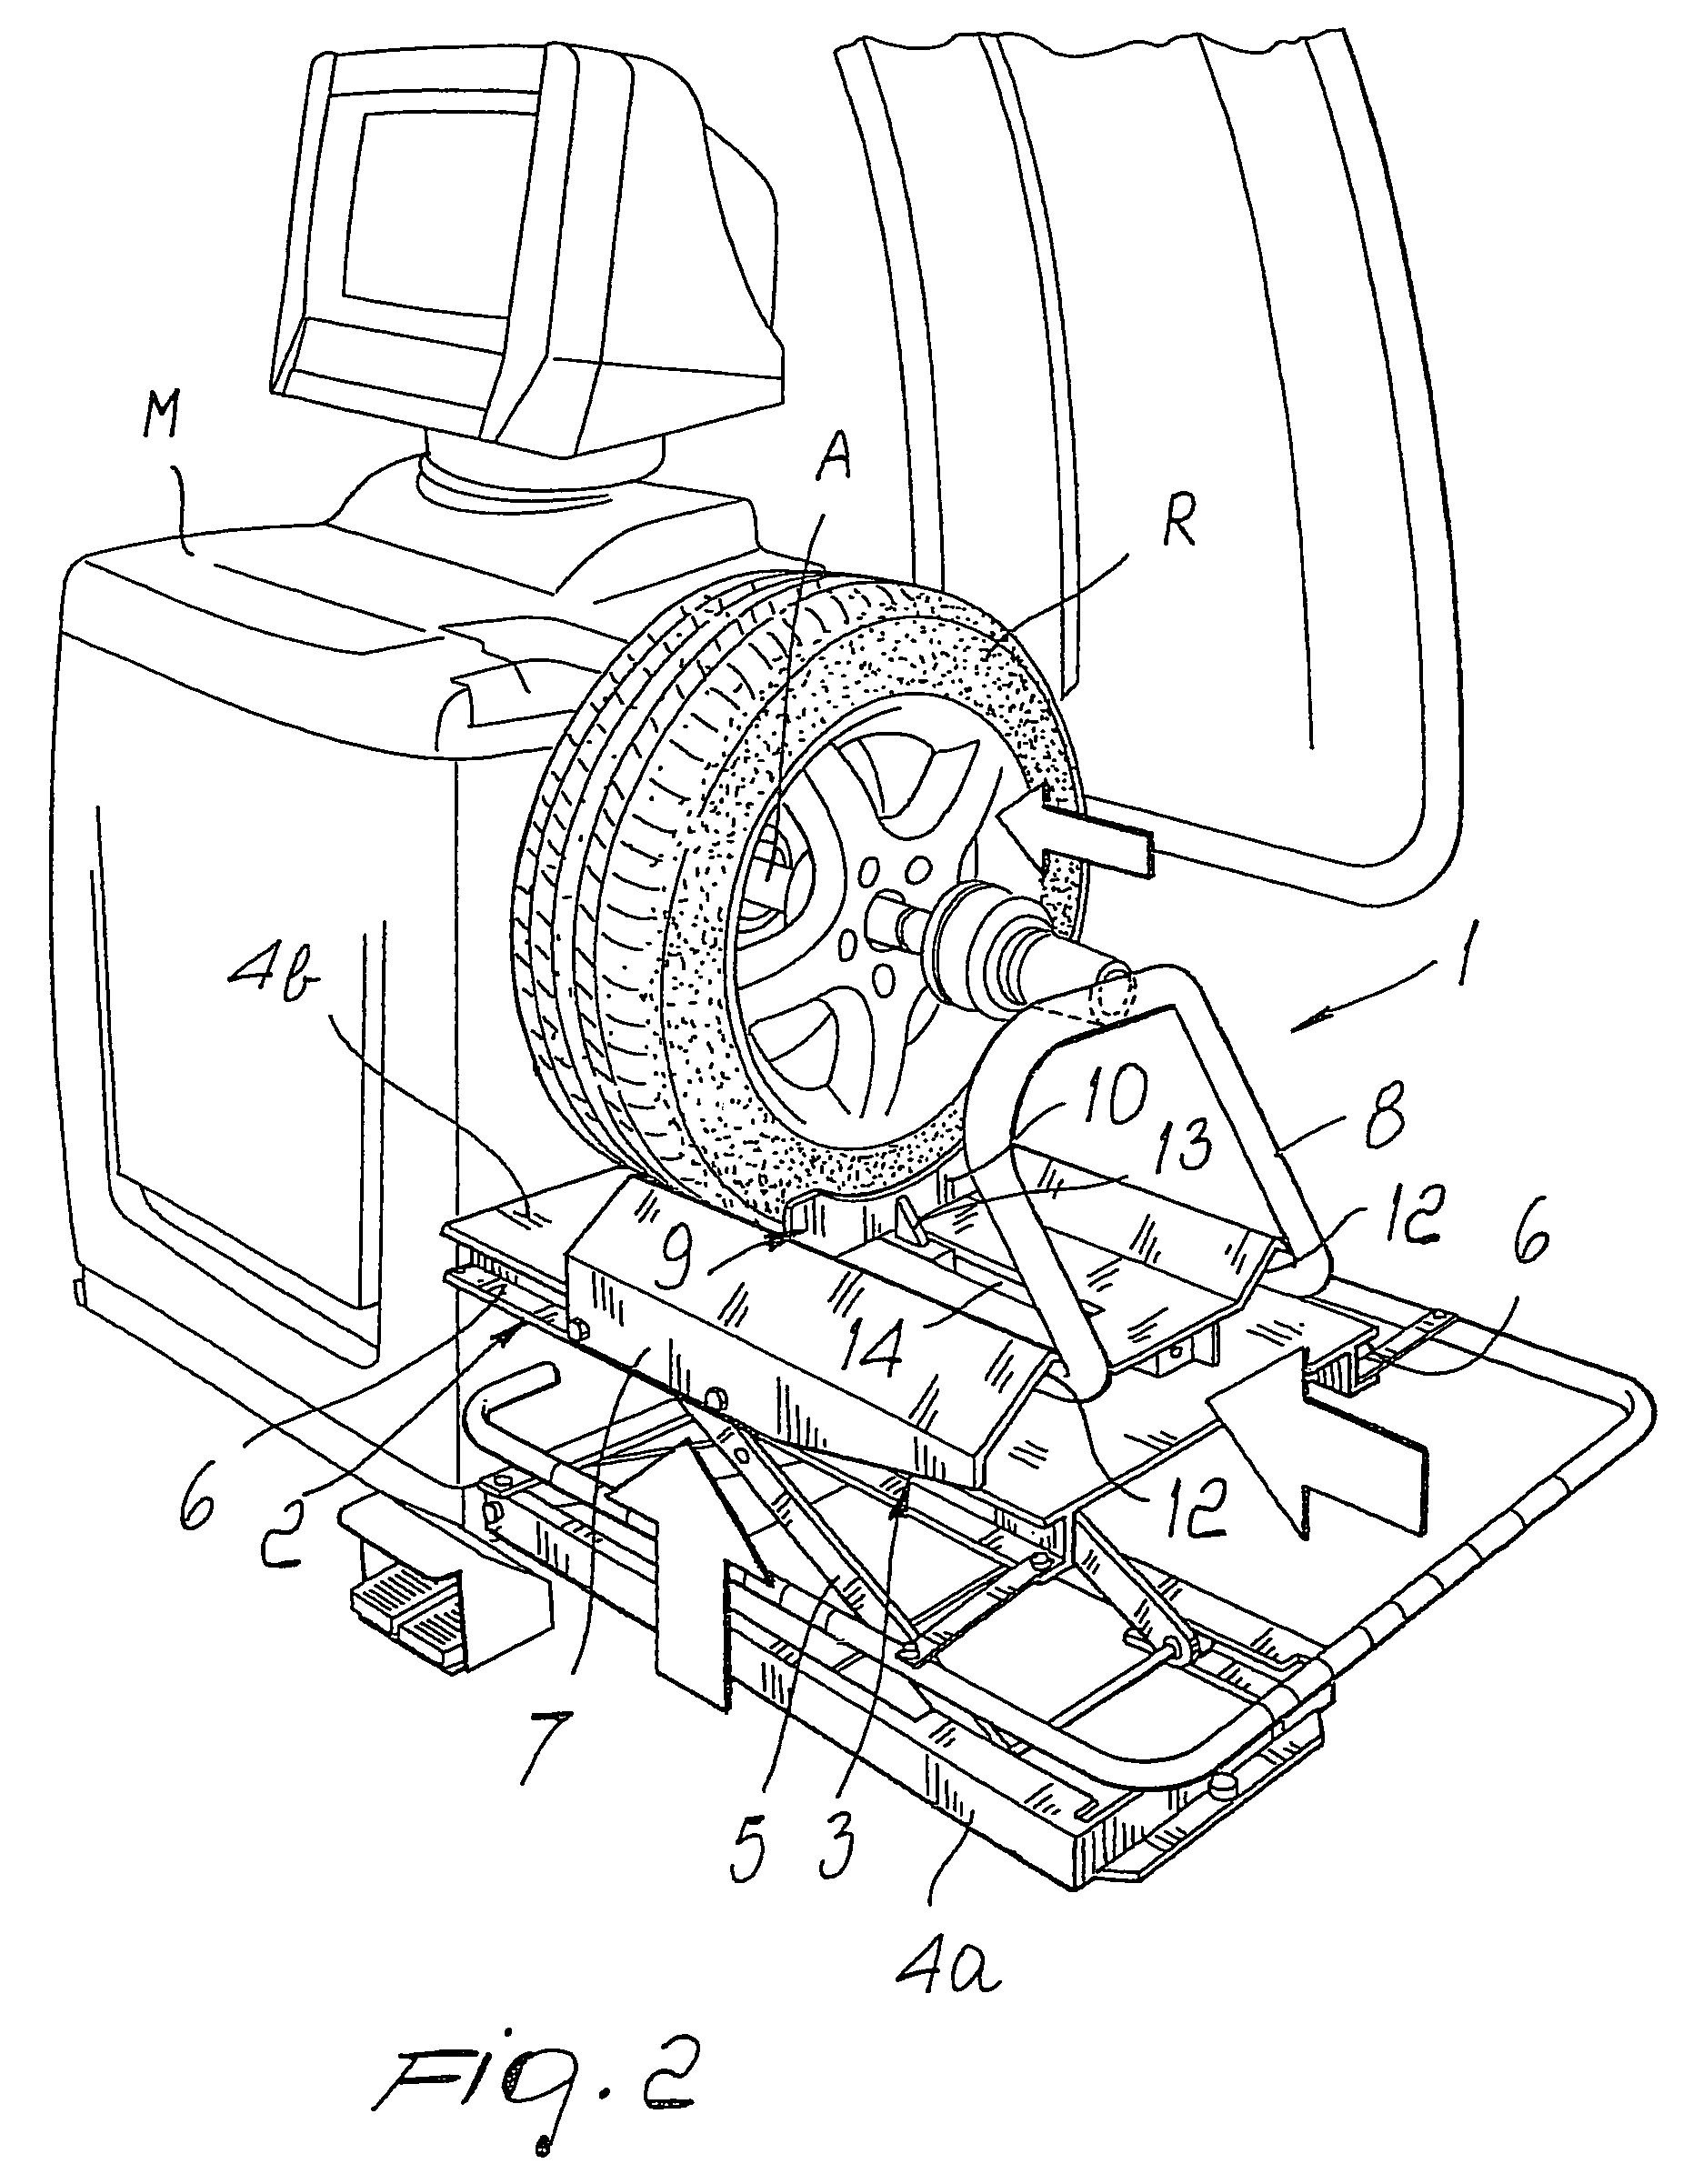 Lifting device for fitting vehicle wheels on wheel balancers